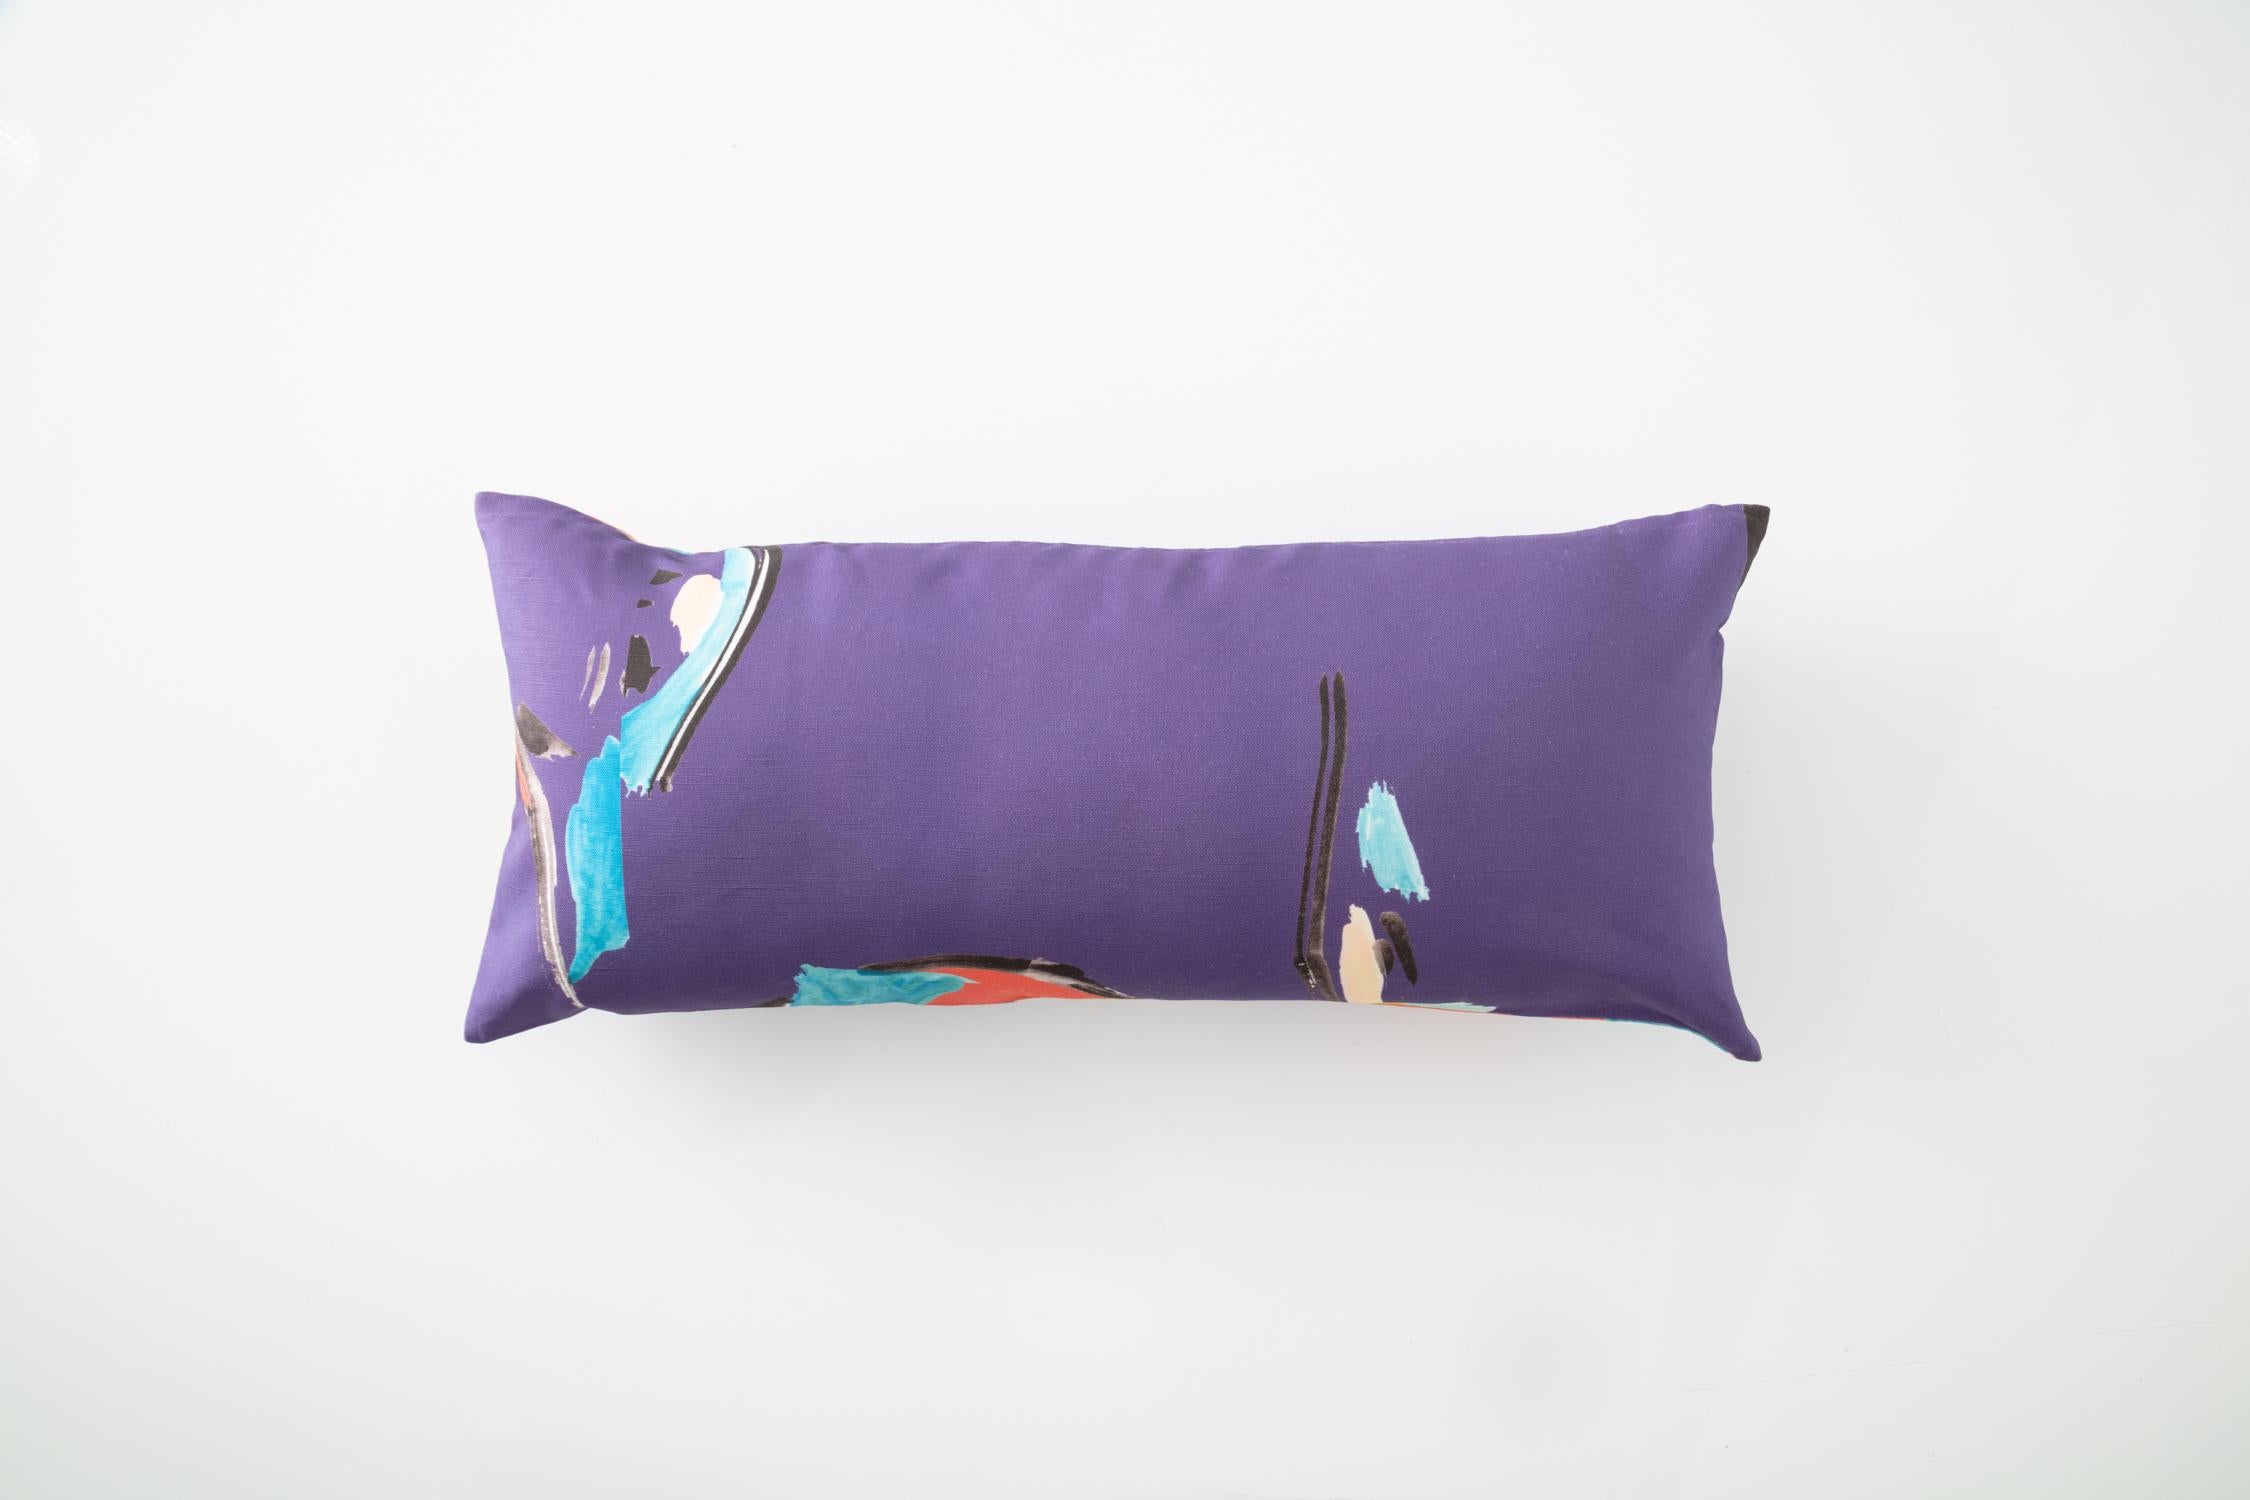 The Rectangle Purple Pod Pillow is digitally printed with an original watercolor painting by Naomi Clark. Every piece out of Clark's abstract and richly colored print collection for Fort Makers adds beauty, art and comfort to the home.

Materials: